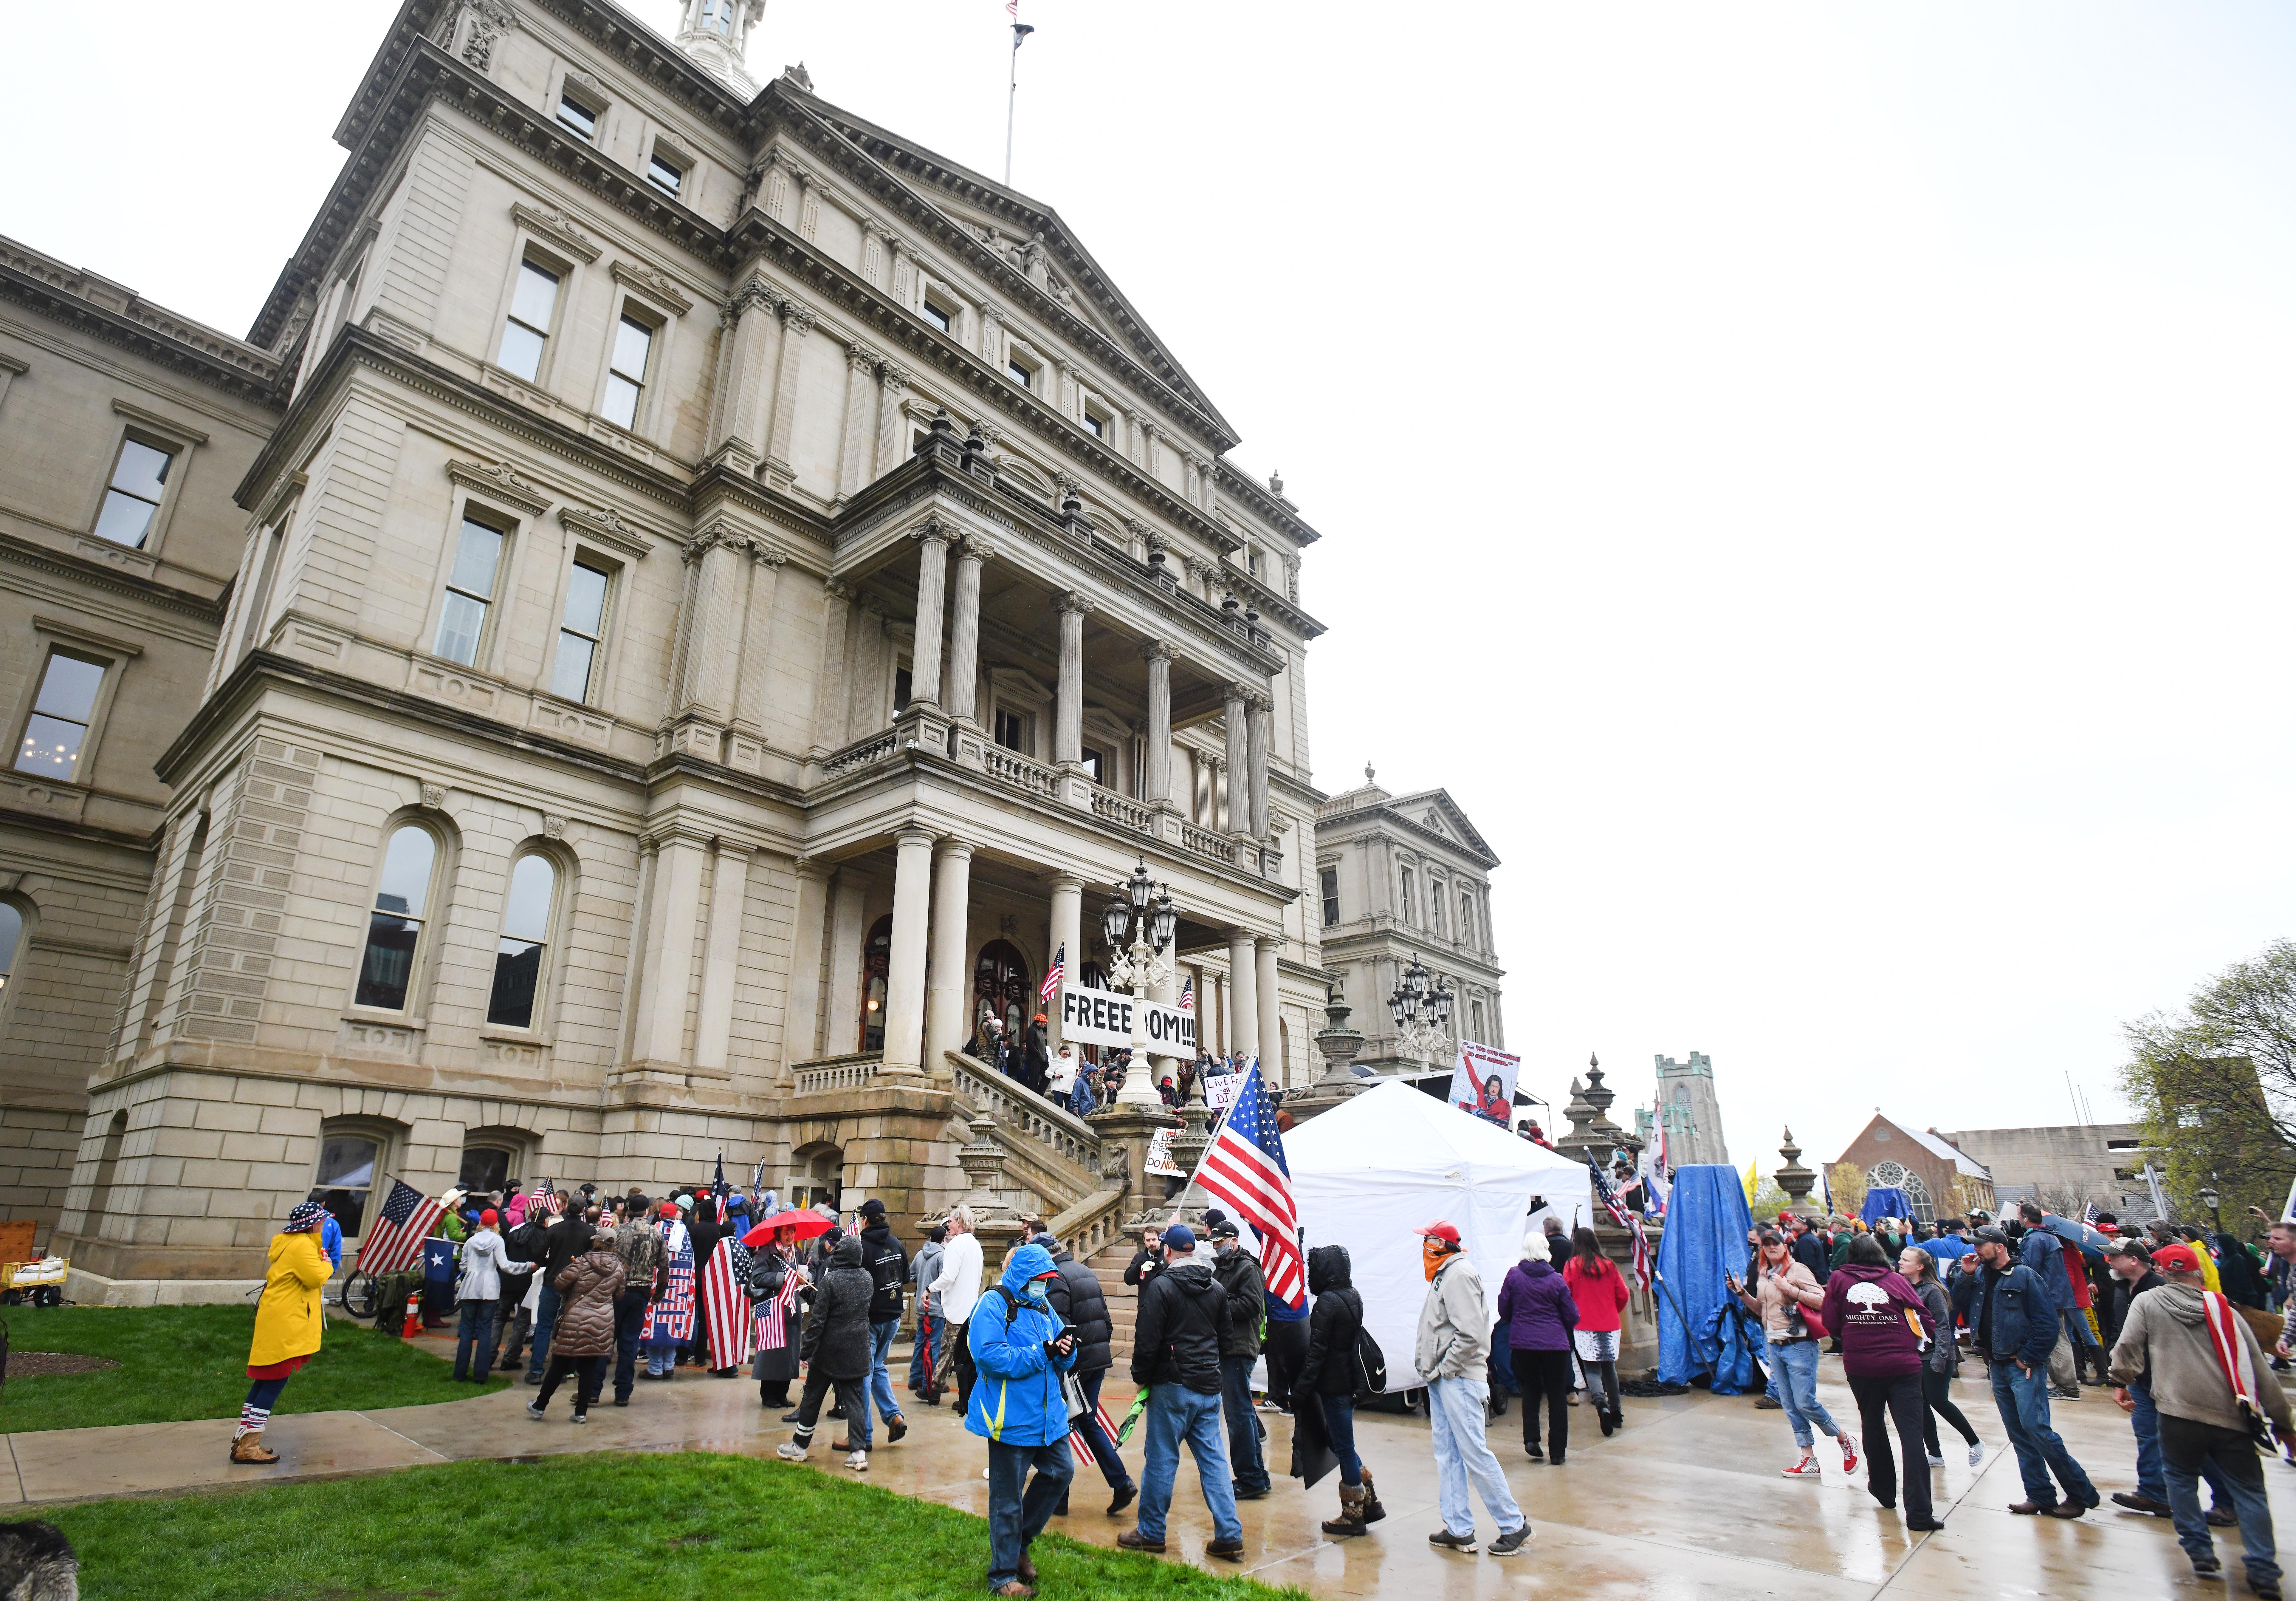 Protesters wait in line to go into the Michigan Capitol after a rally on the front stemps and lawn in Lansing.